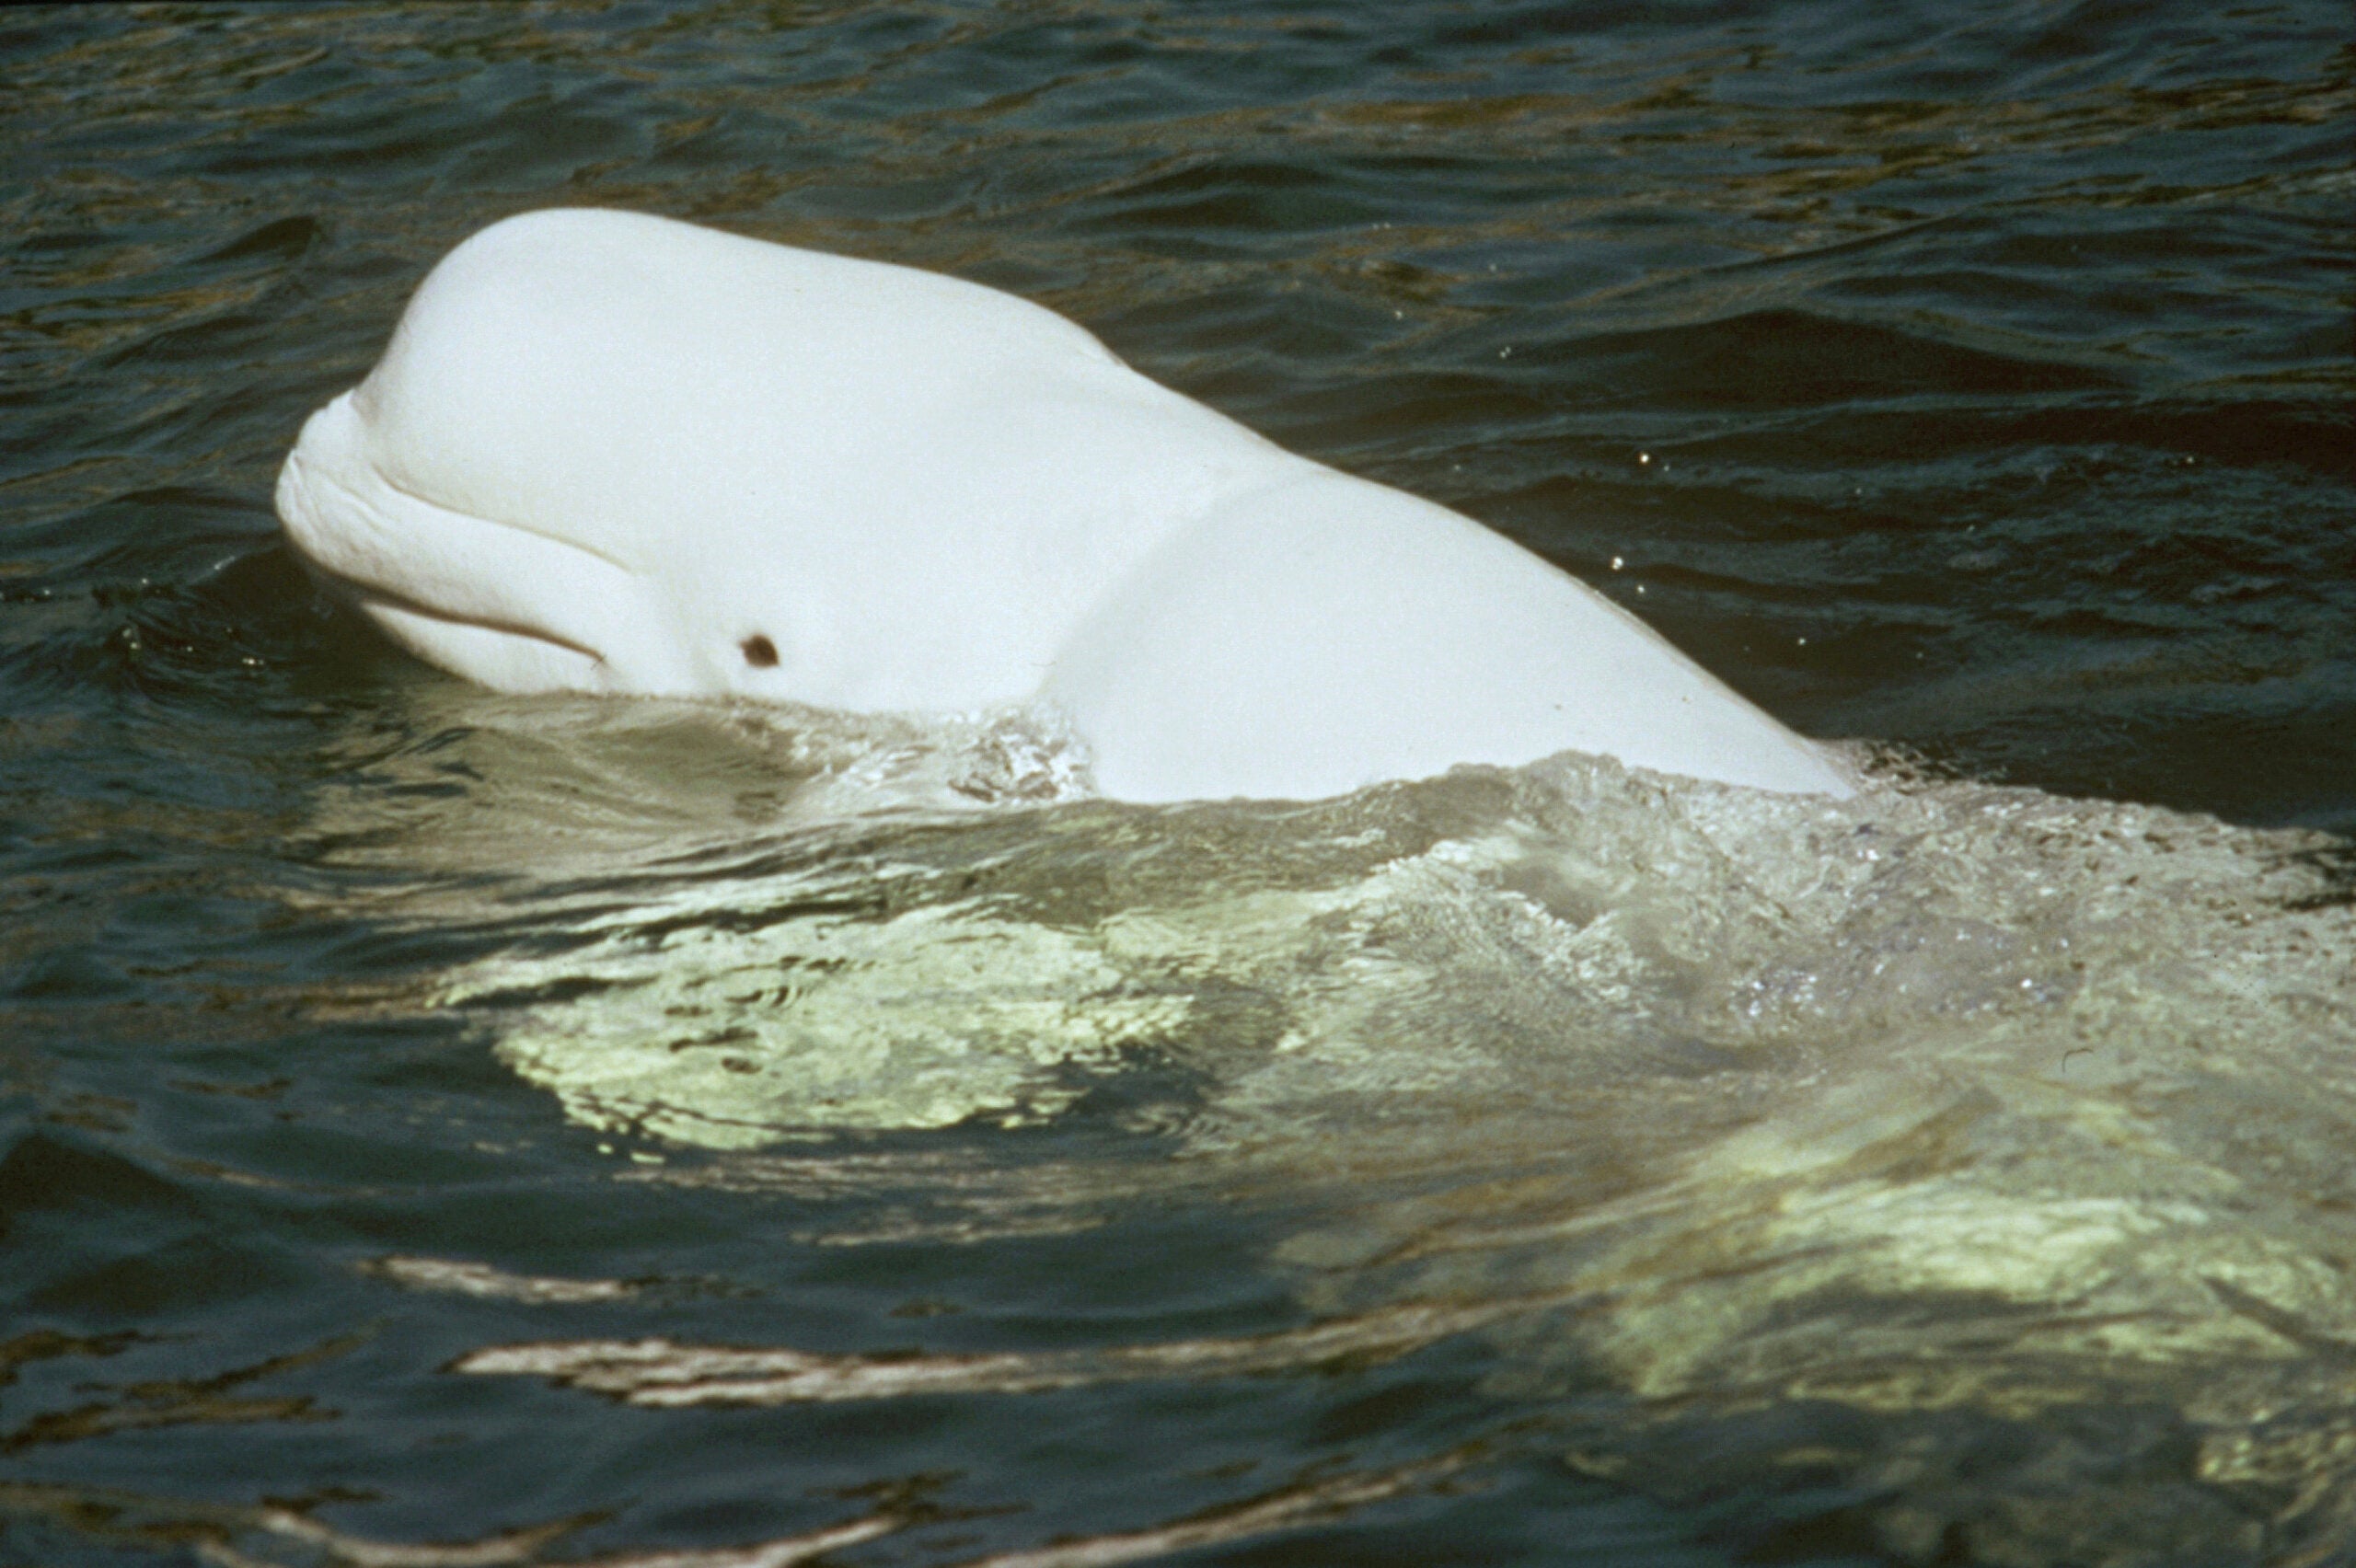 Sound pollution messes with beluga whales’ journey plans